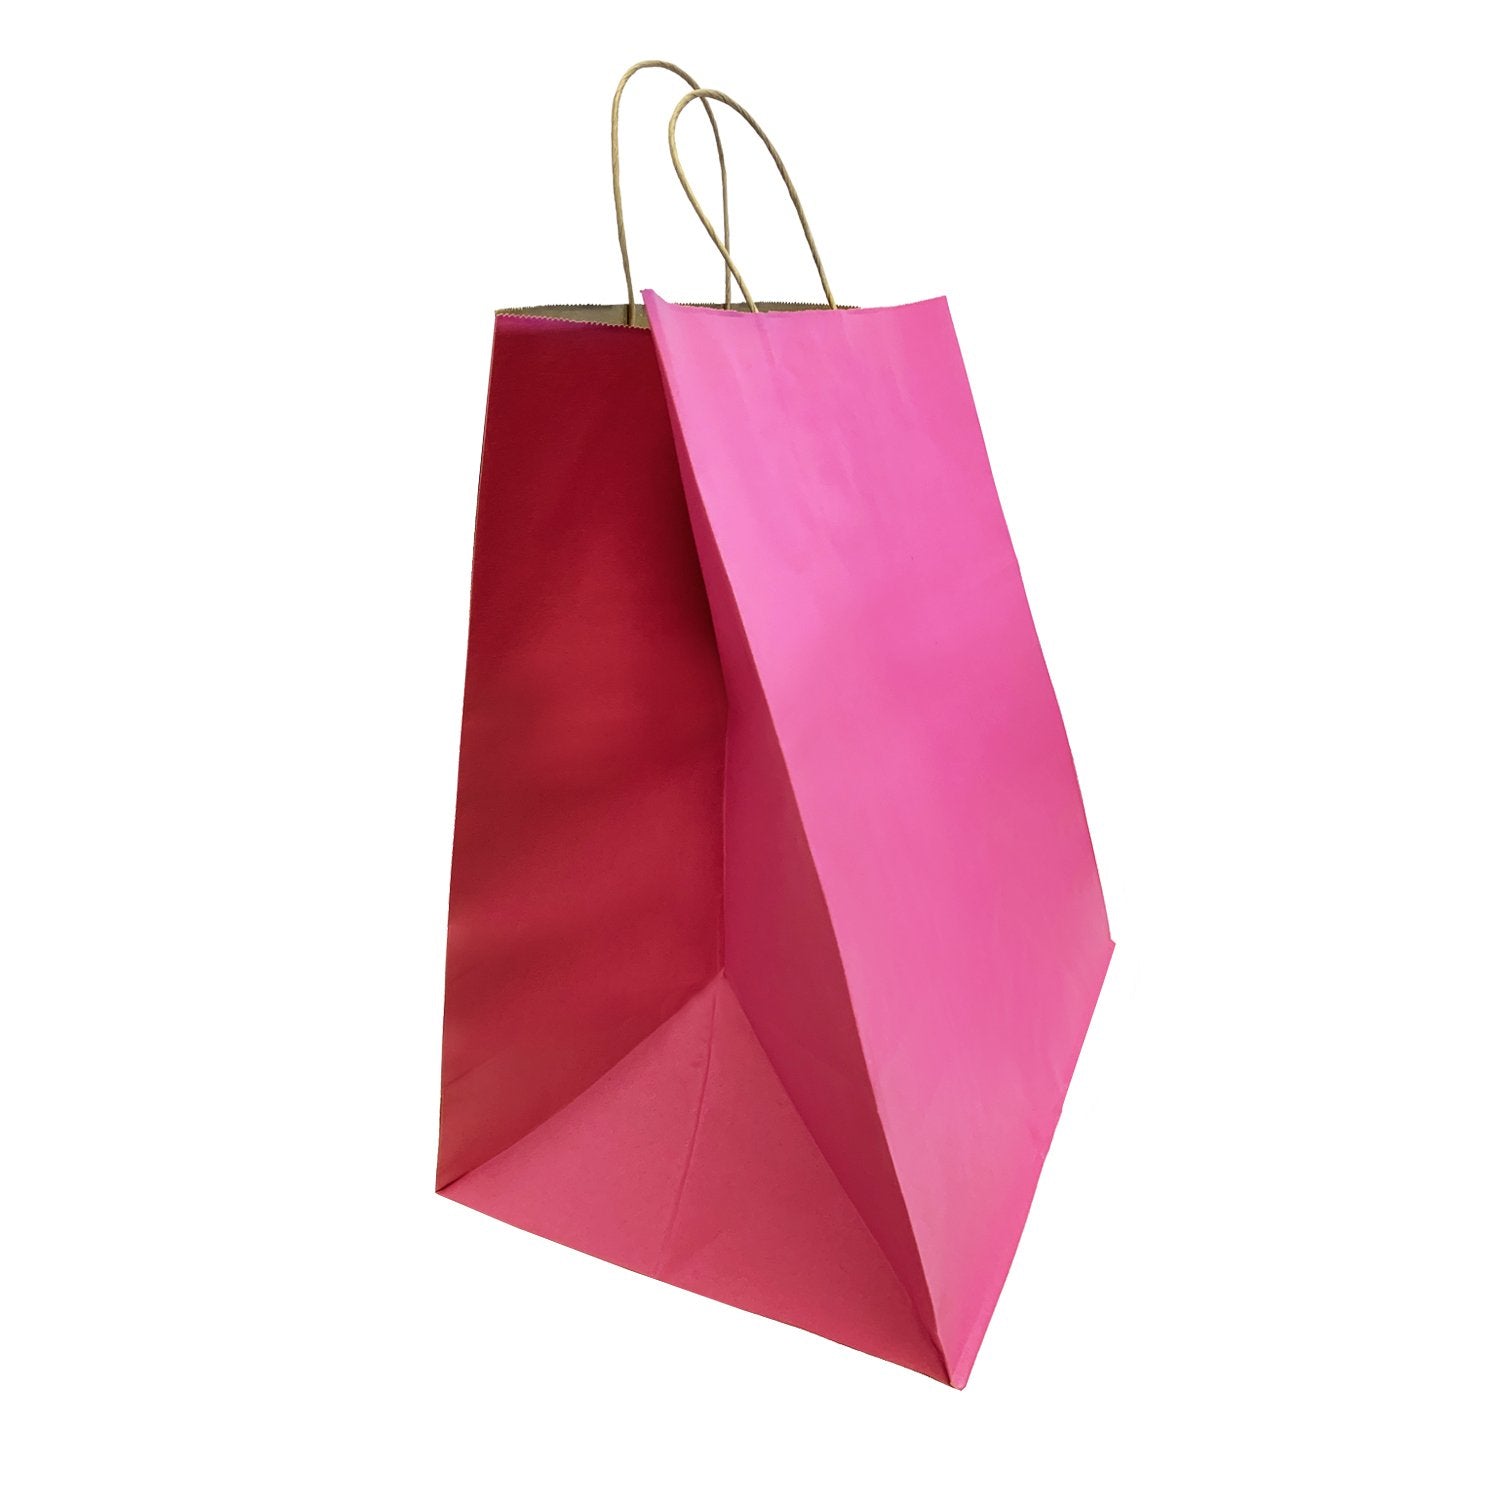 200 Pcs, Super Royal, 14x10x15.75 inches, Pink Kraft Paper Bags, with Twisted Handle